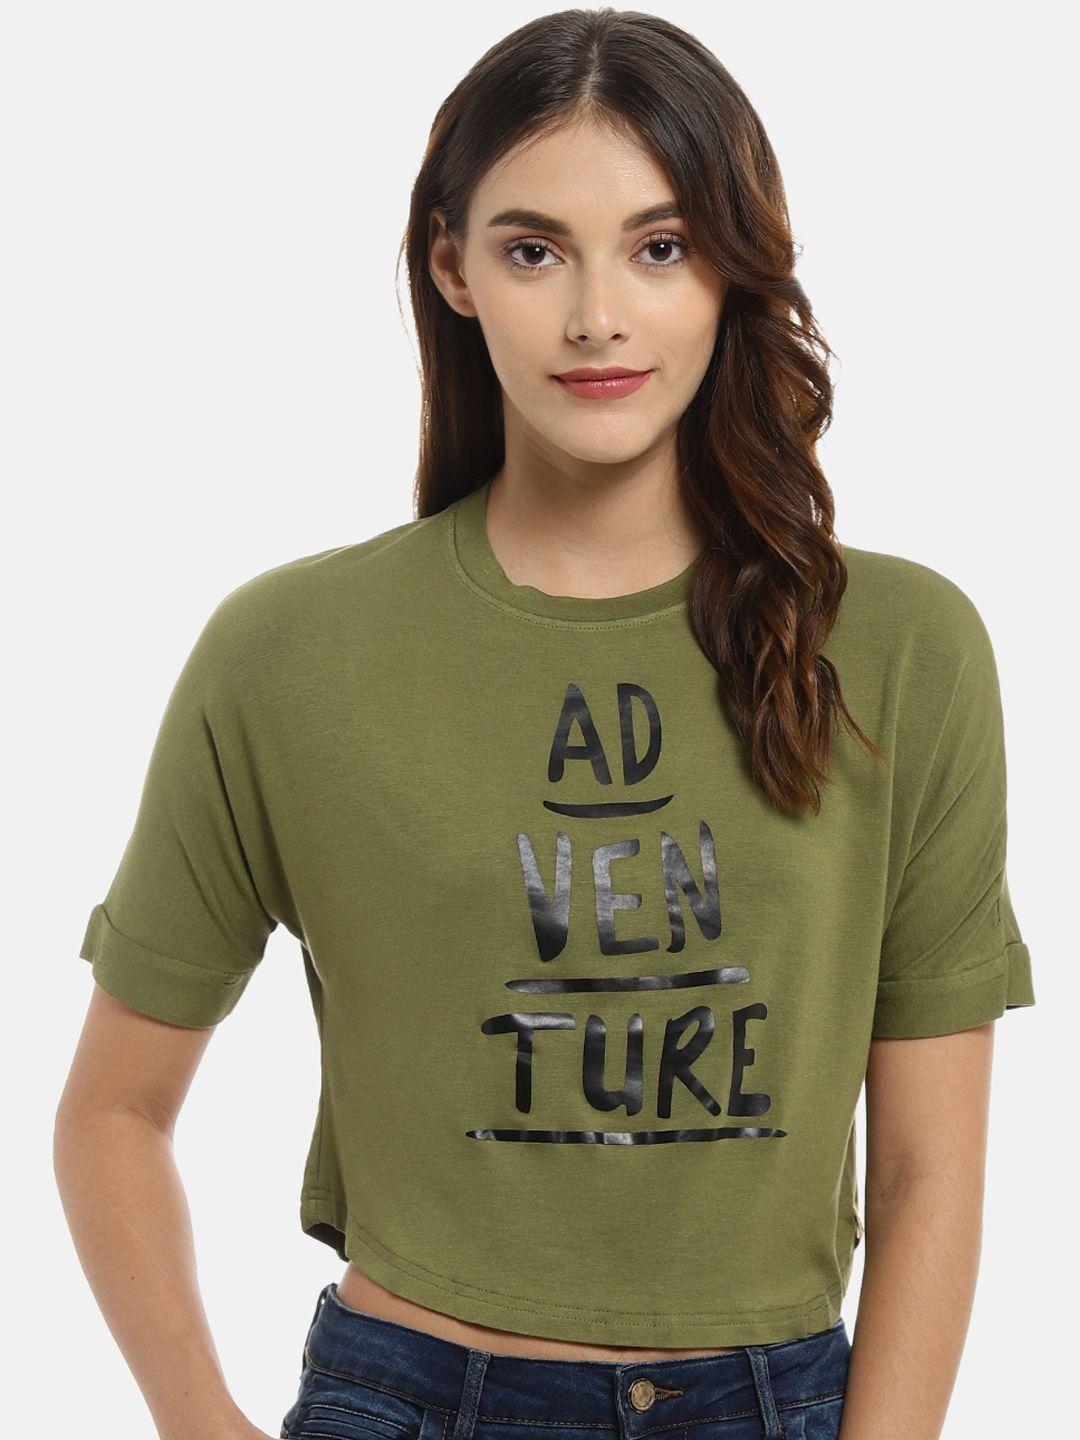 campus-sutra-women-green-printed-top